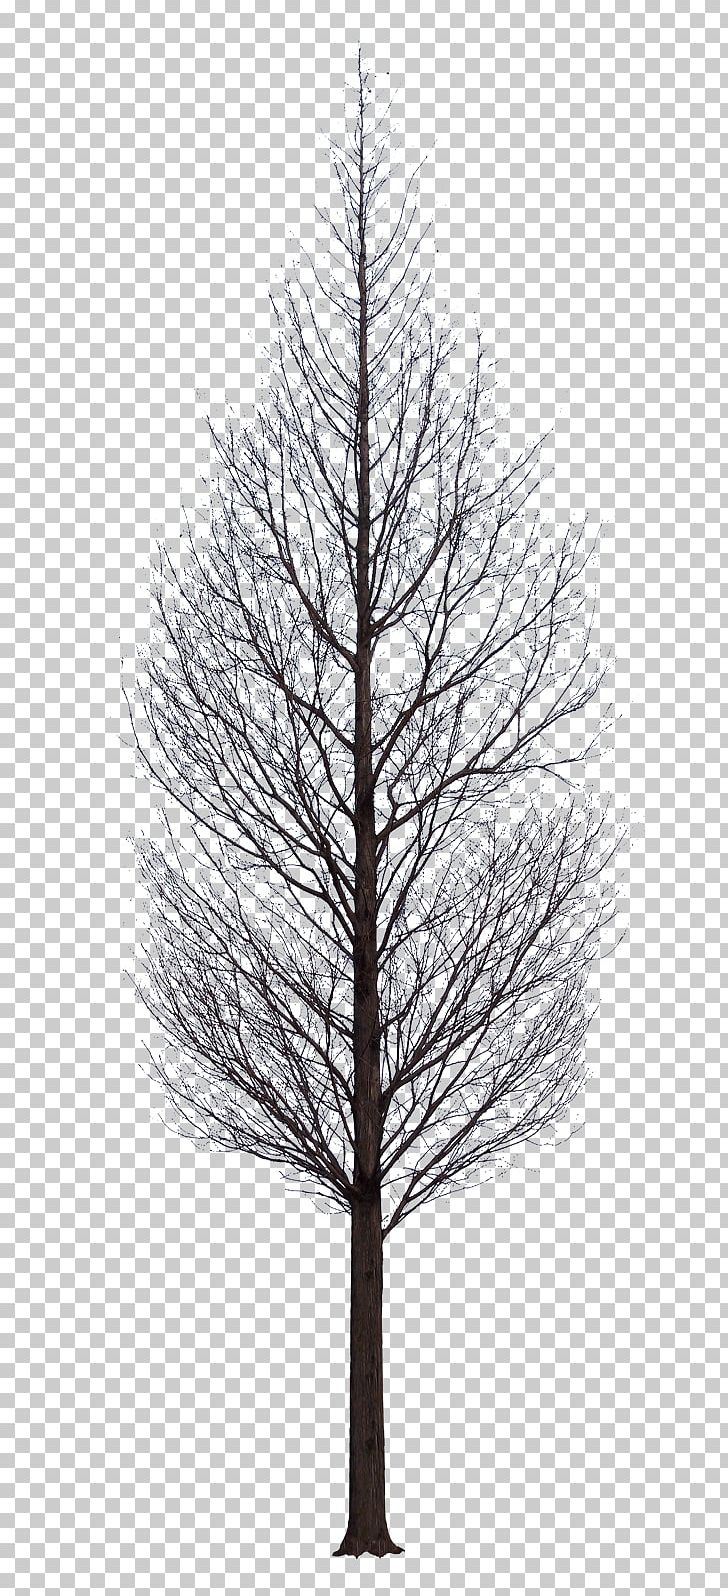 Artificial Christmas Tree Light Branch PNG, Clipart, Architectural Rendering, Artificial Christmas Tree, Black And White, Branch, Christmas Tree Free PNG Download